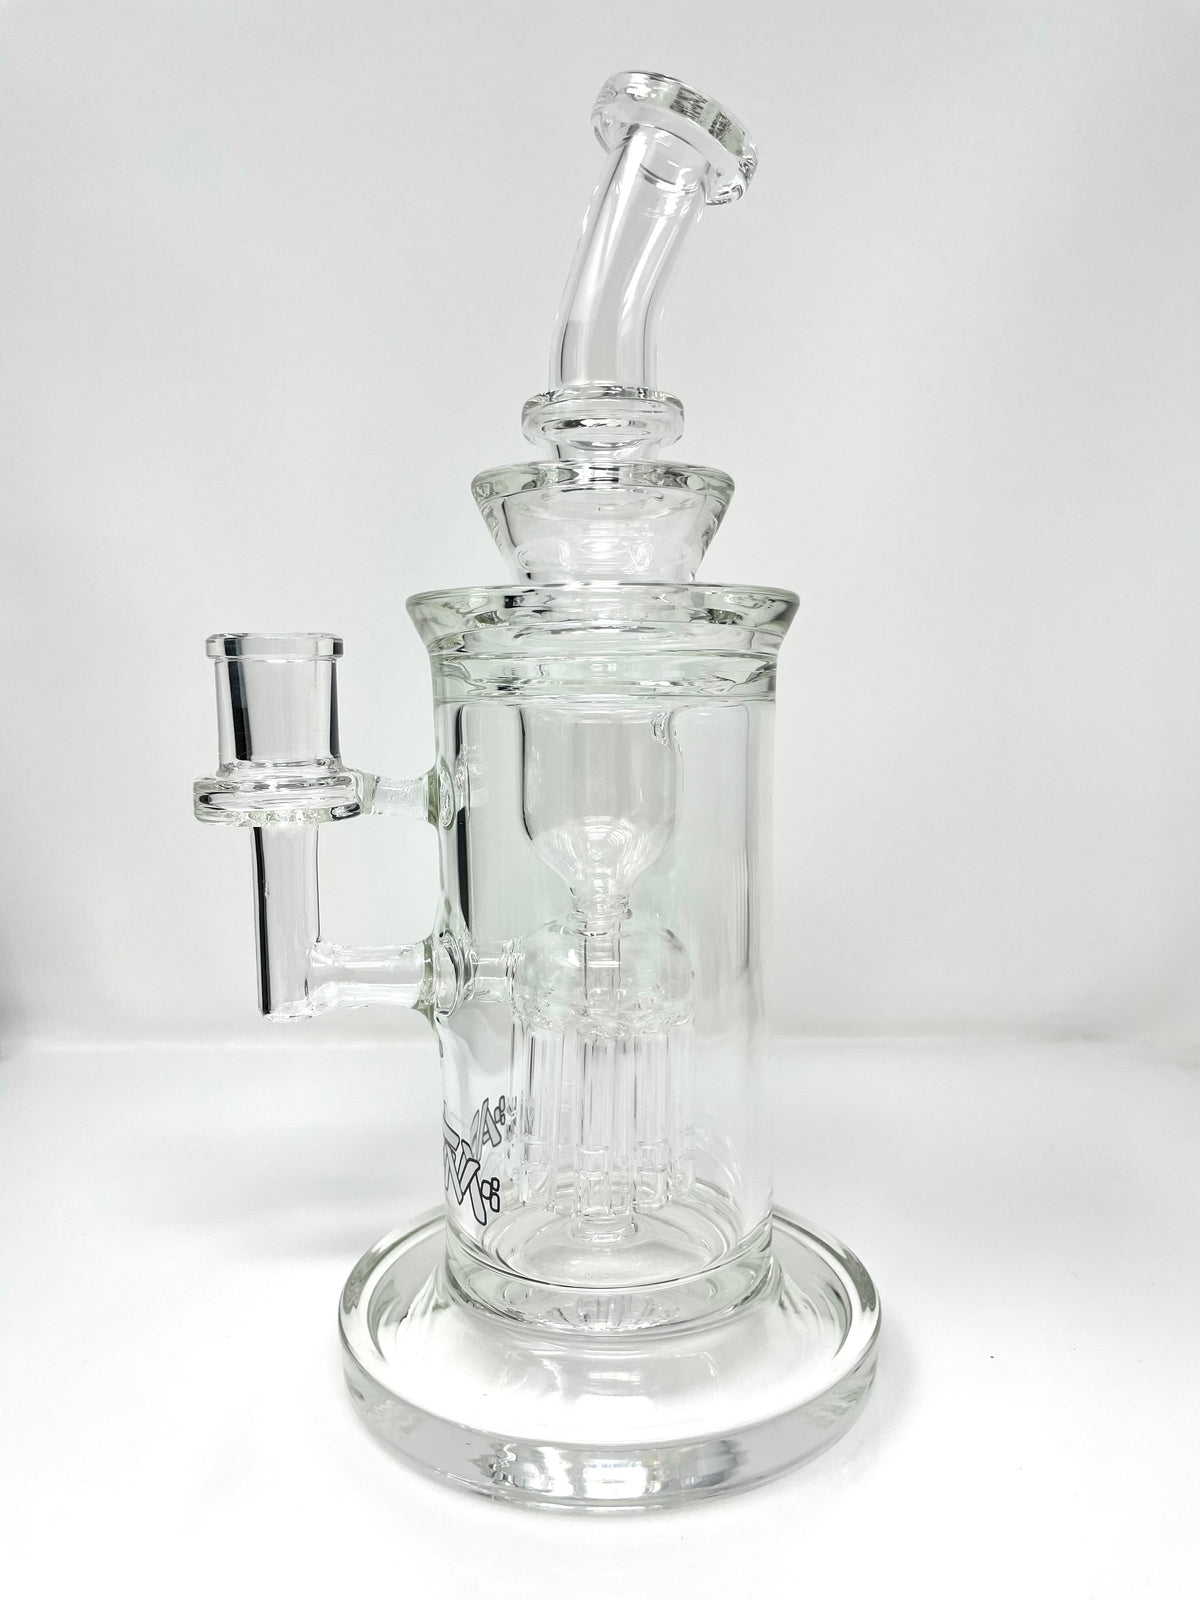 10" Power Station Clear Glass Incycler Dab Rig